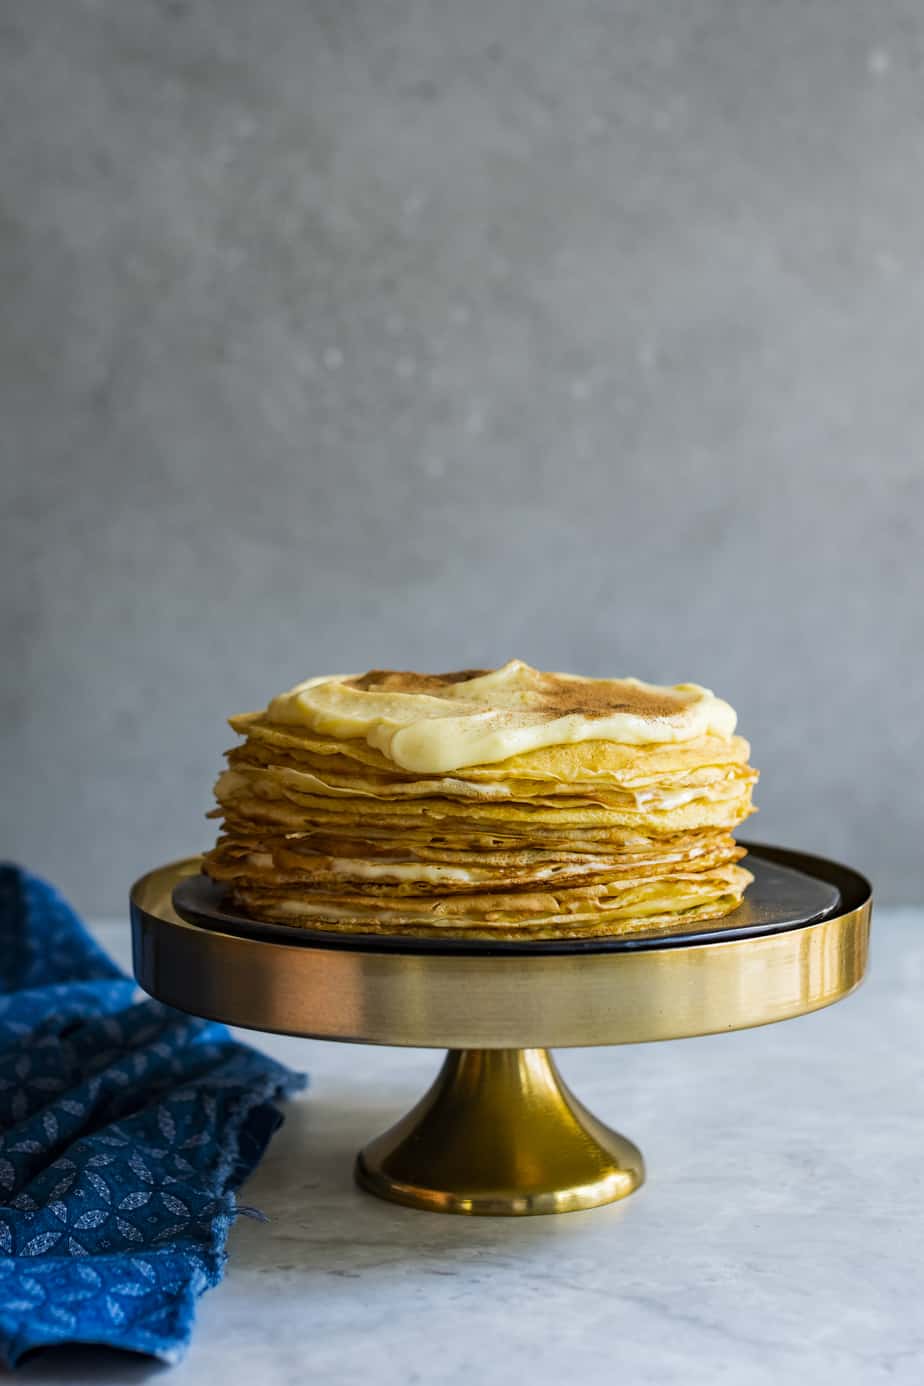 Layers of crêpes filled with a traditional South African milktart custard filling. This Milktart Crêpe Cake made with Stork Bake is the ultimate breakfast in bed or scrumptious dessert.